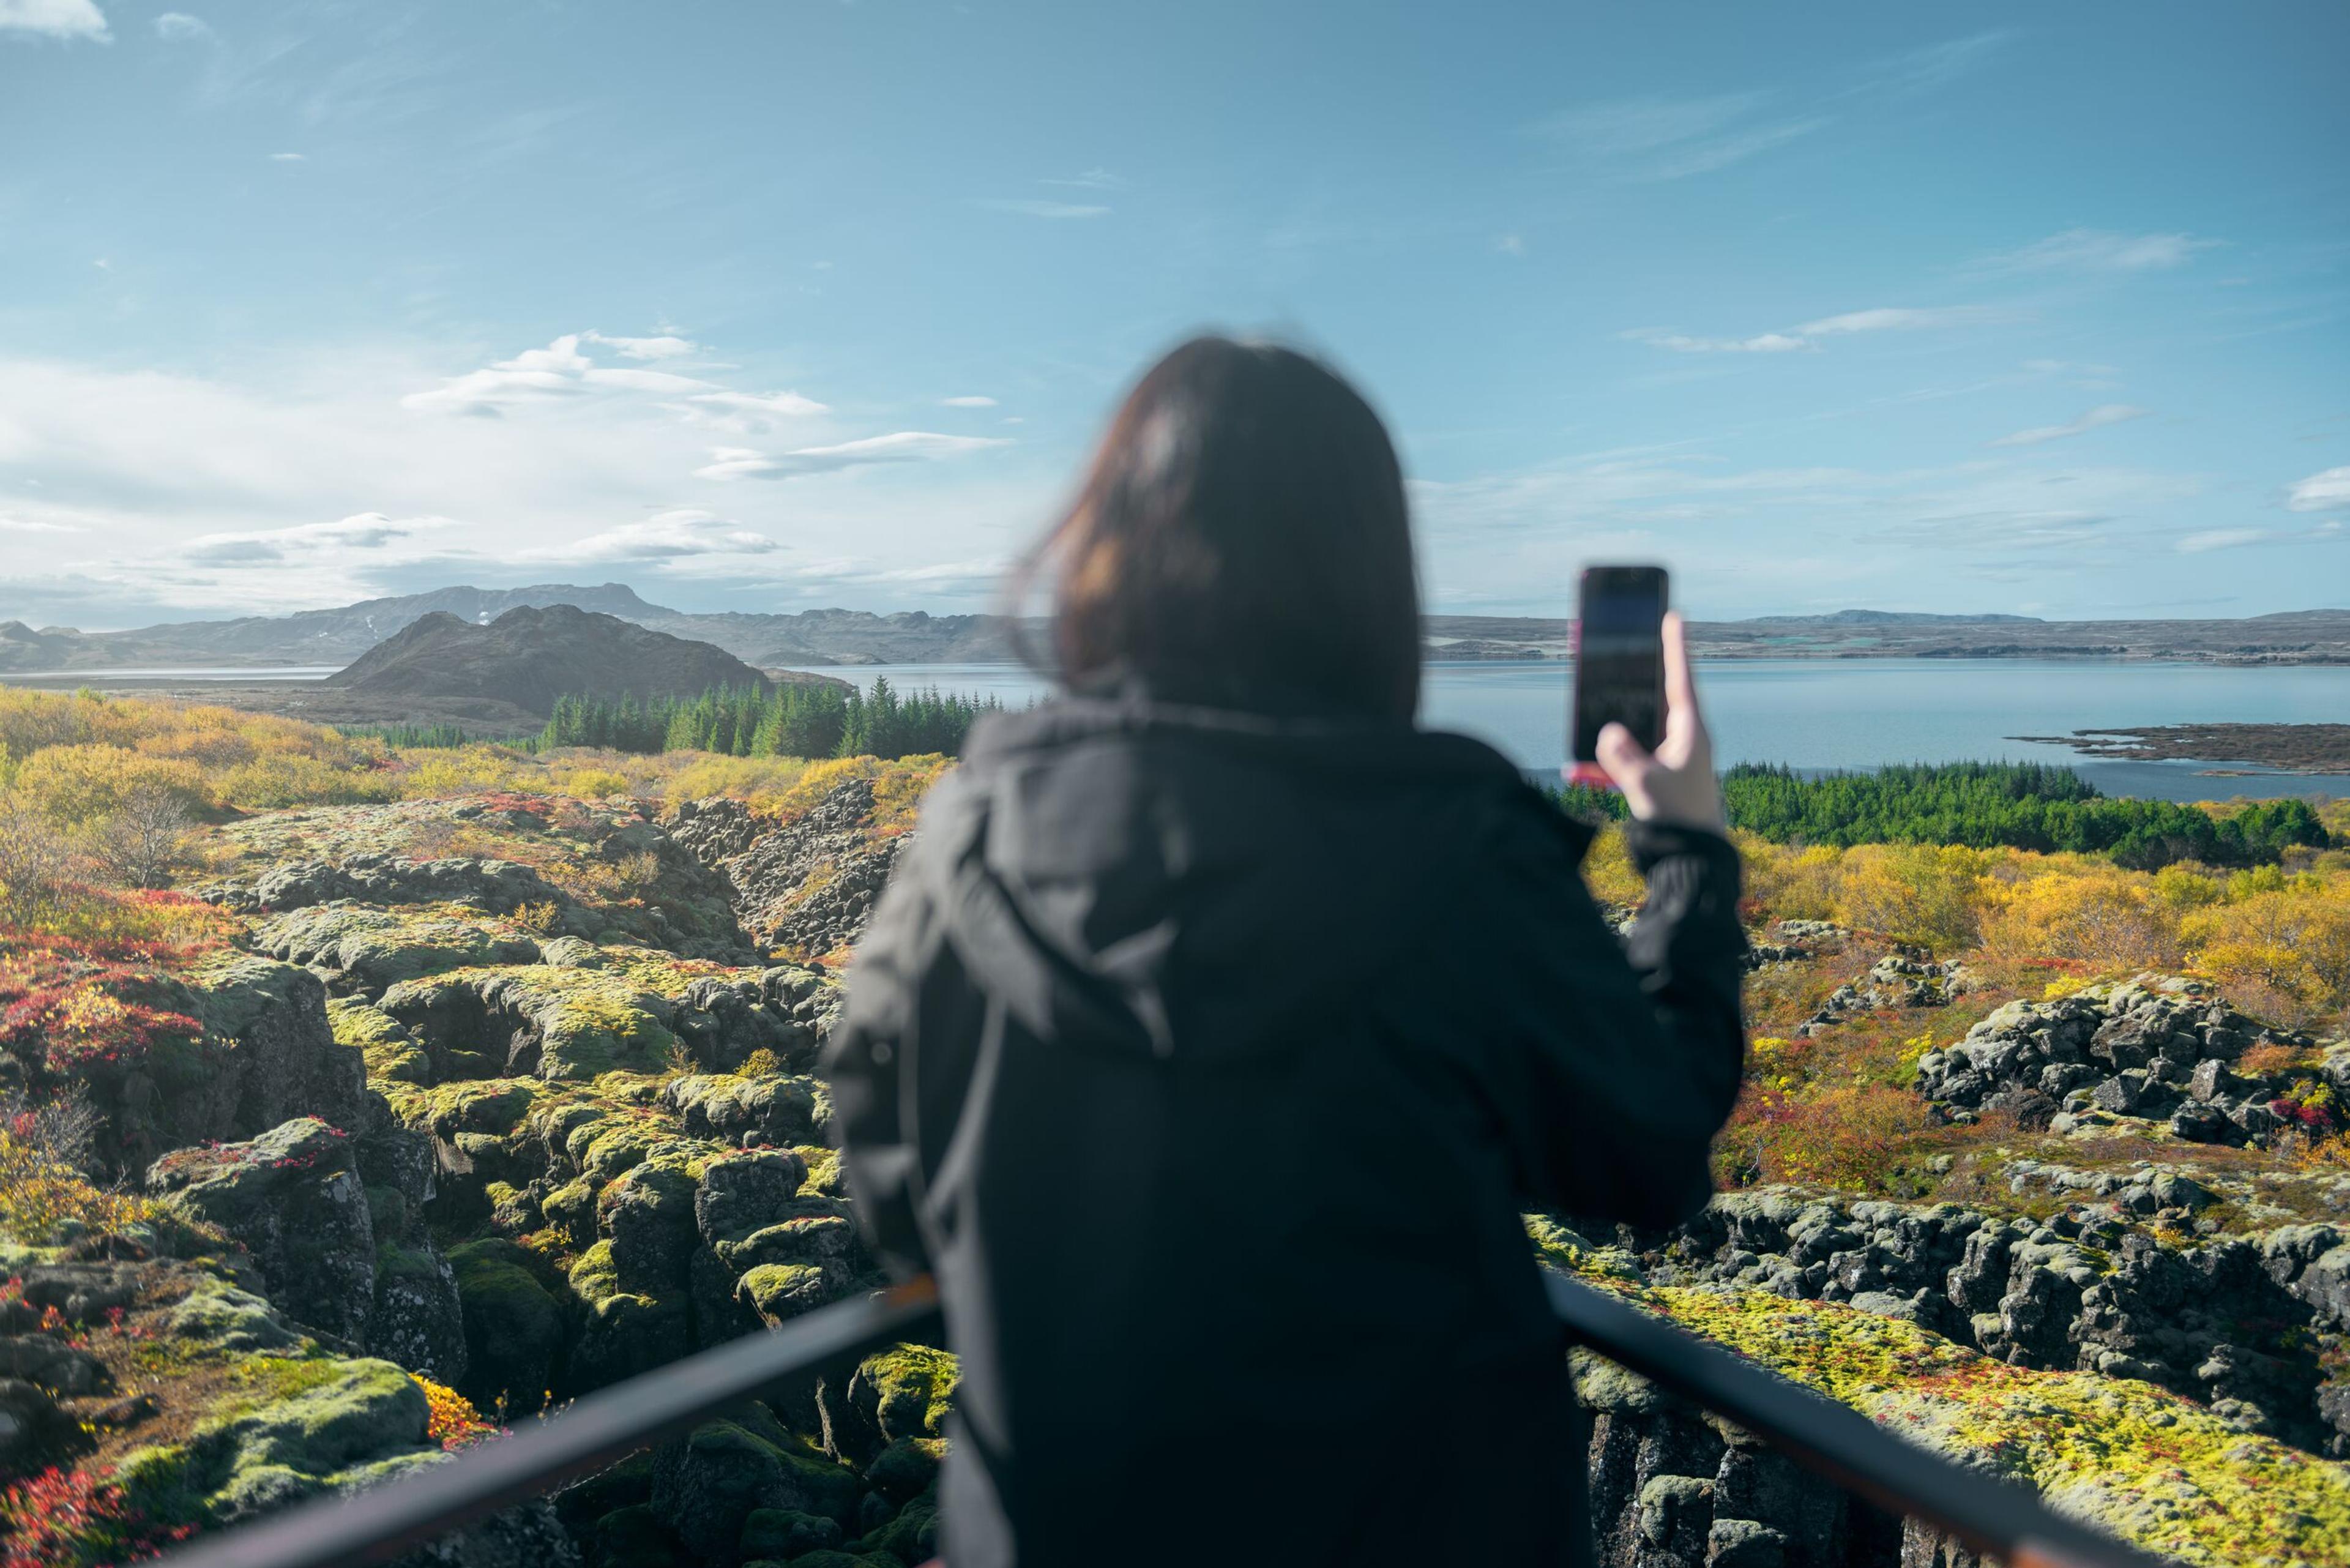 A person with their back to the camera takes a photo with a smartphone, capturing a landscape featuring autumn-hued vegetation and a lake, with mountains in the distance under a partly cloudy sky.